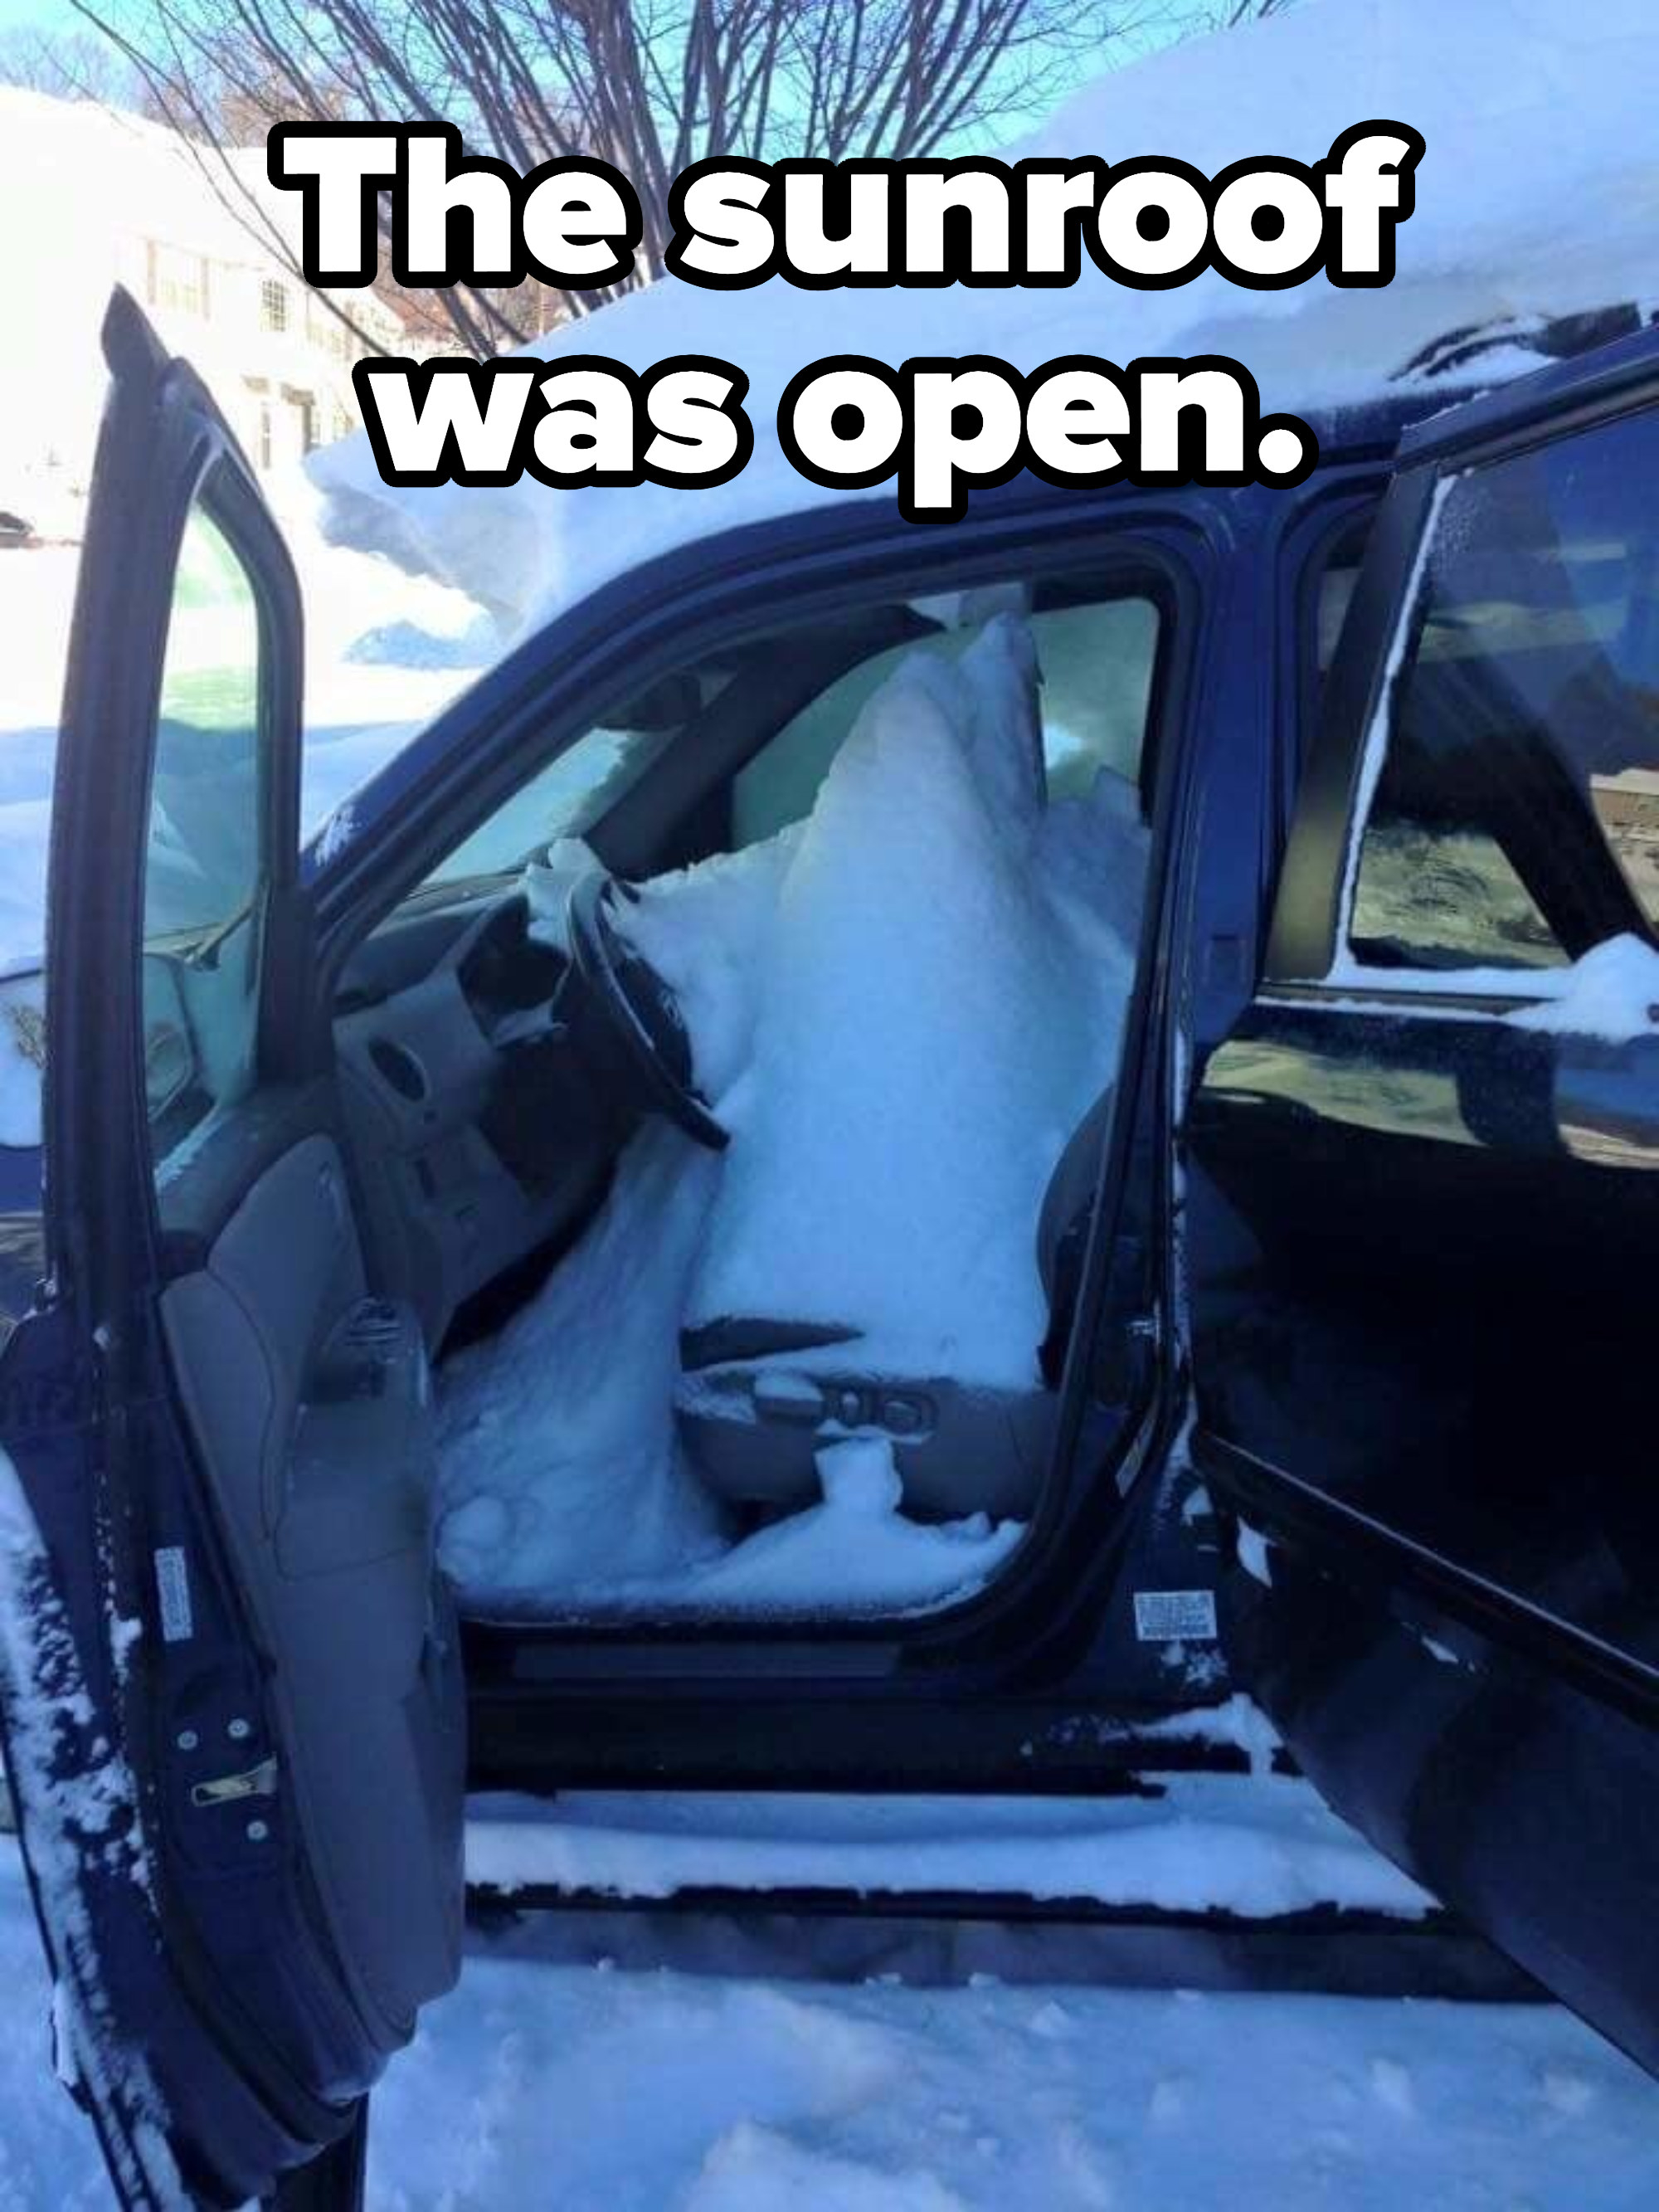 A car with snow and ice inside